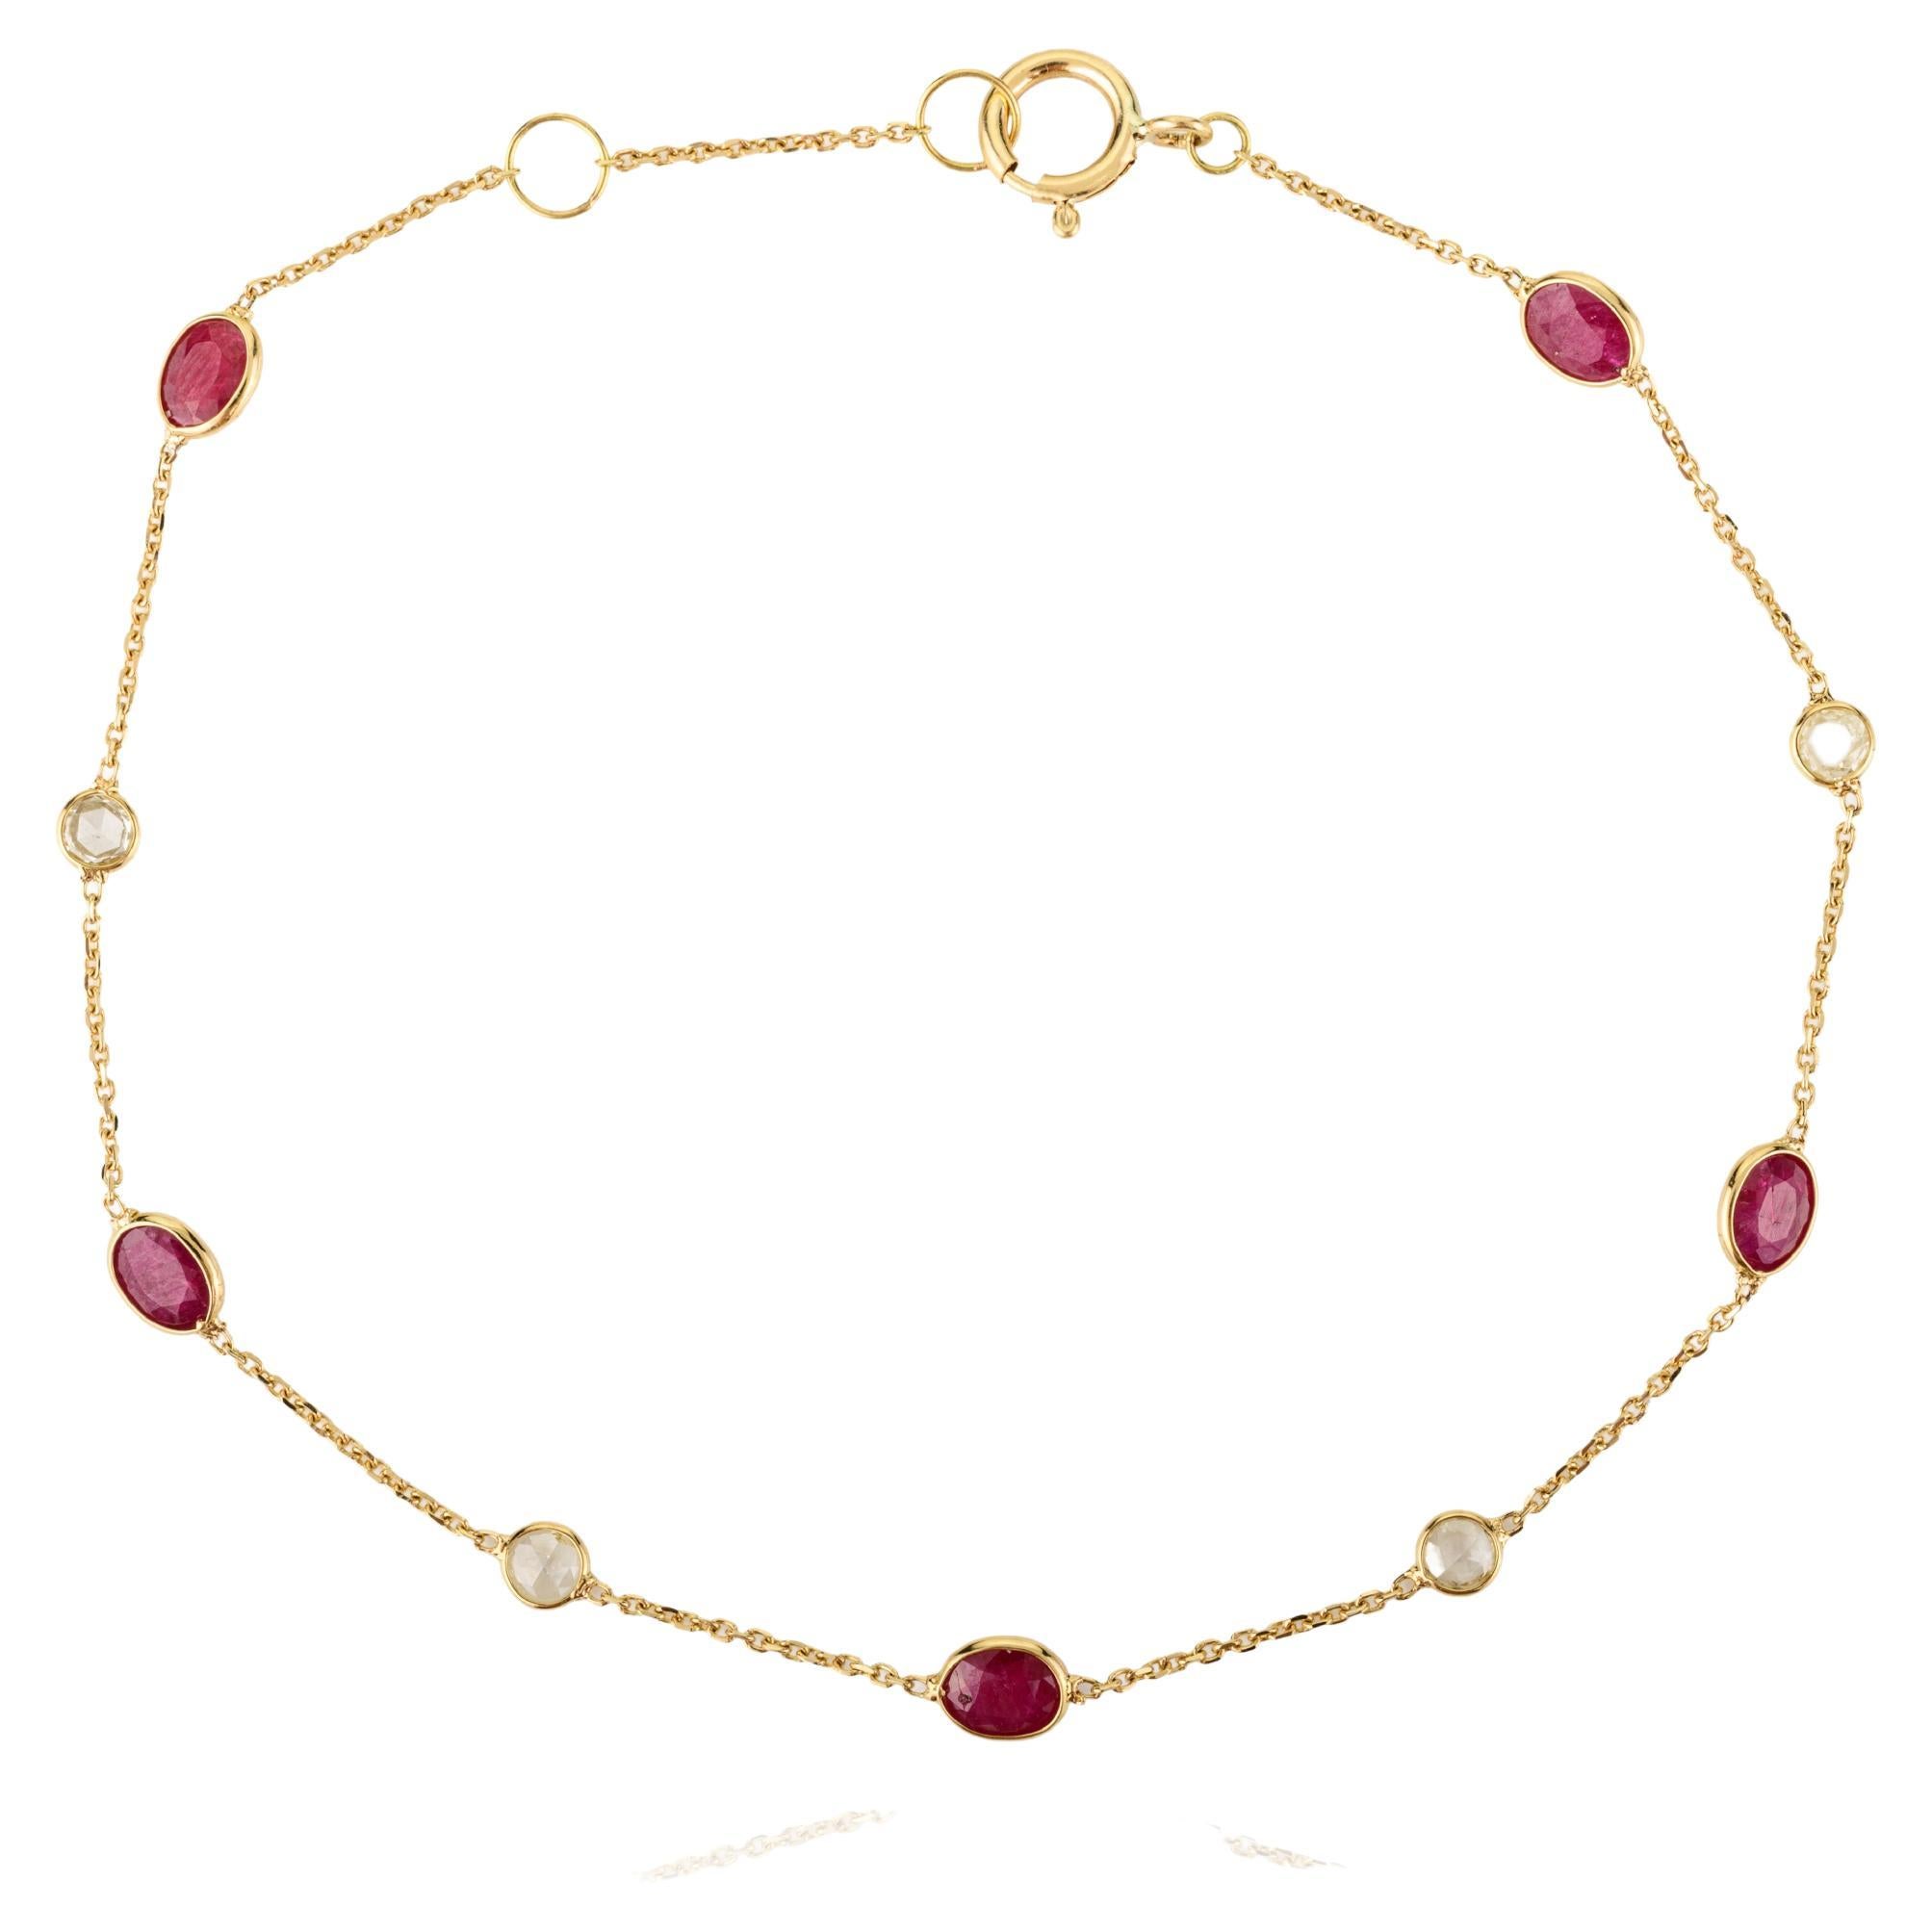 Minimal Natural Ruby Diamond Chain Bracelet in 18k Solid Yellow Gold